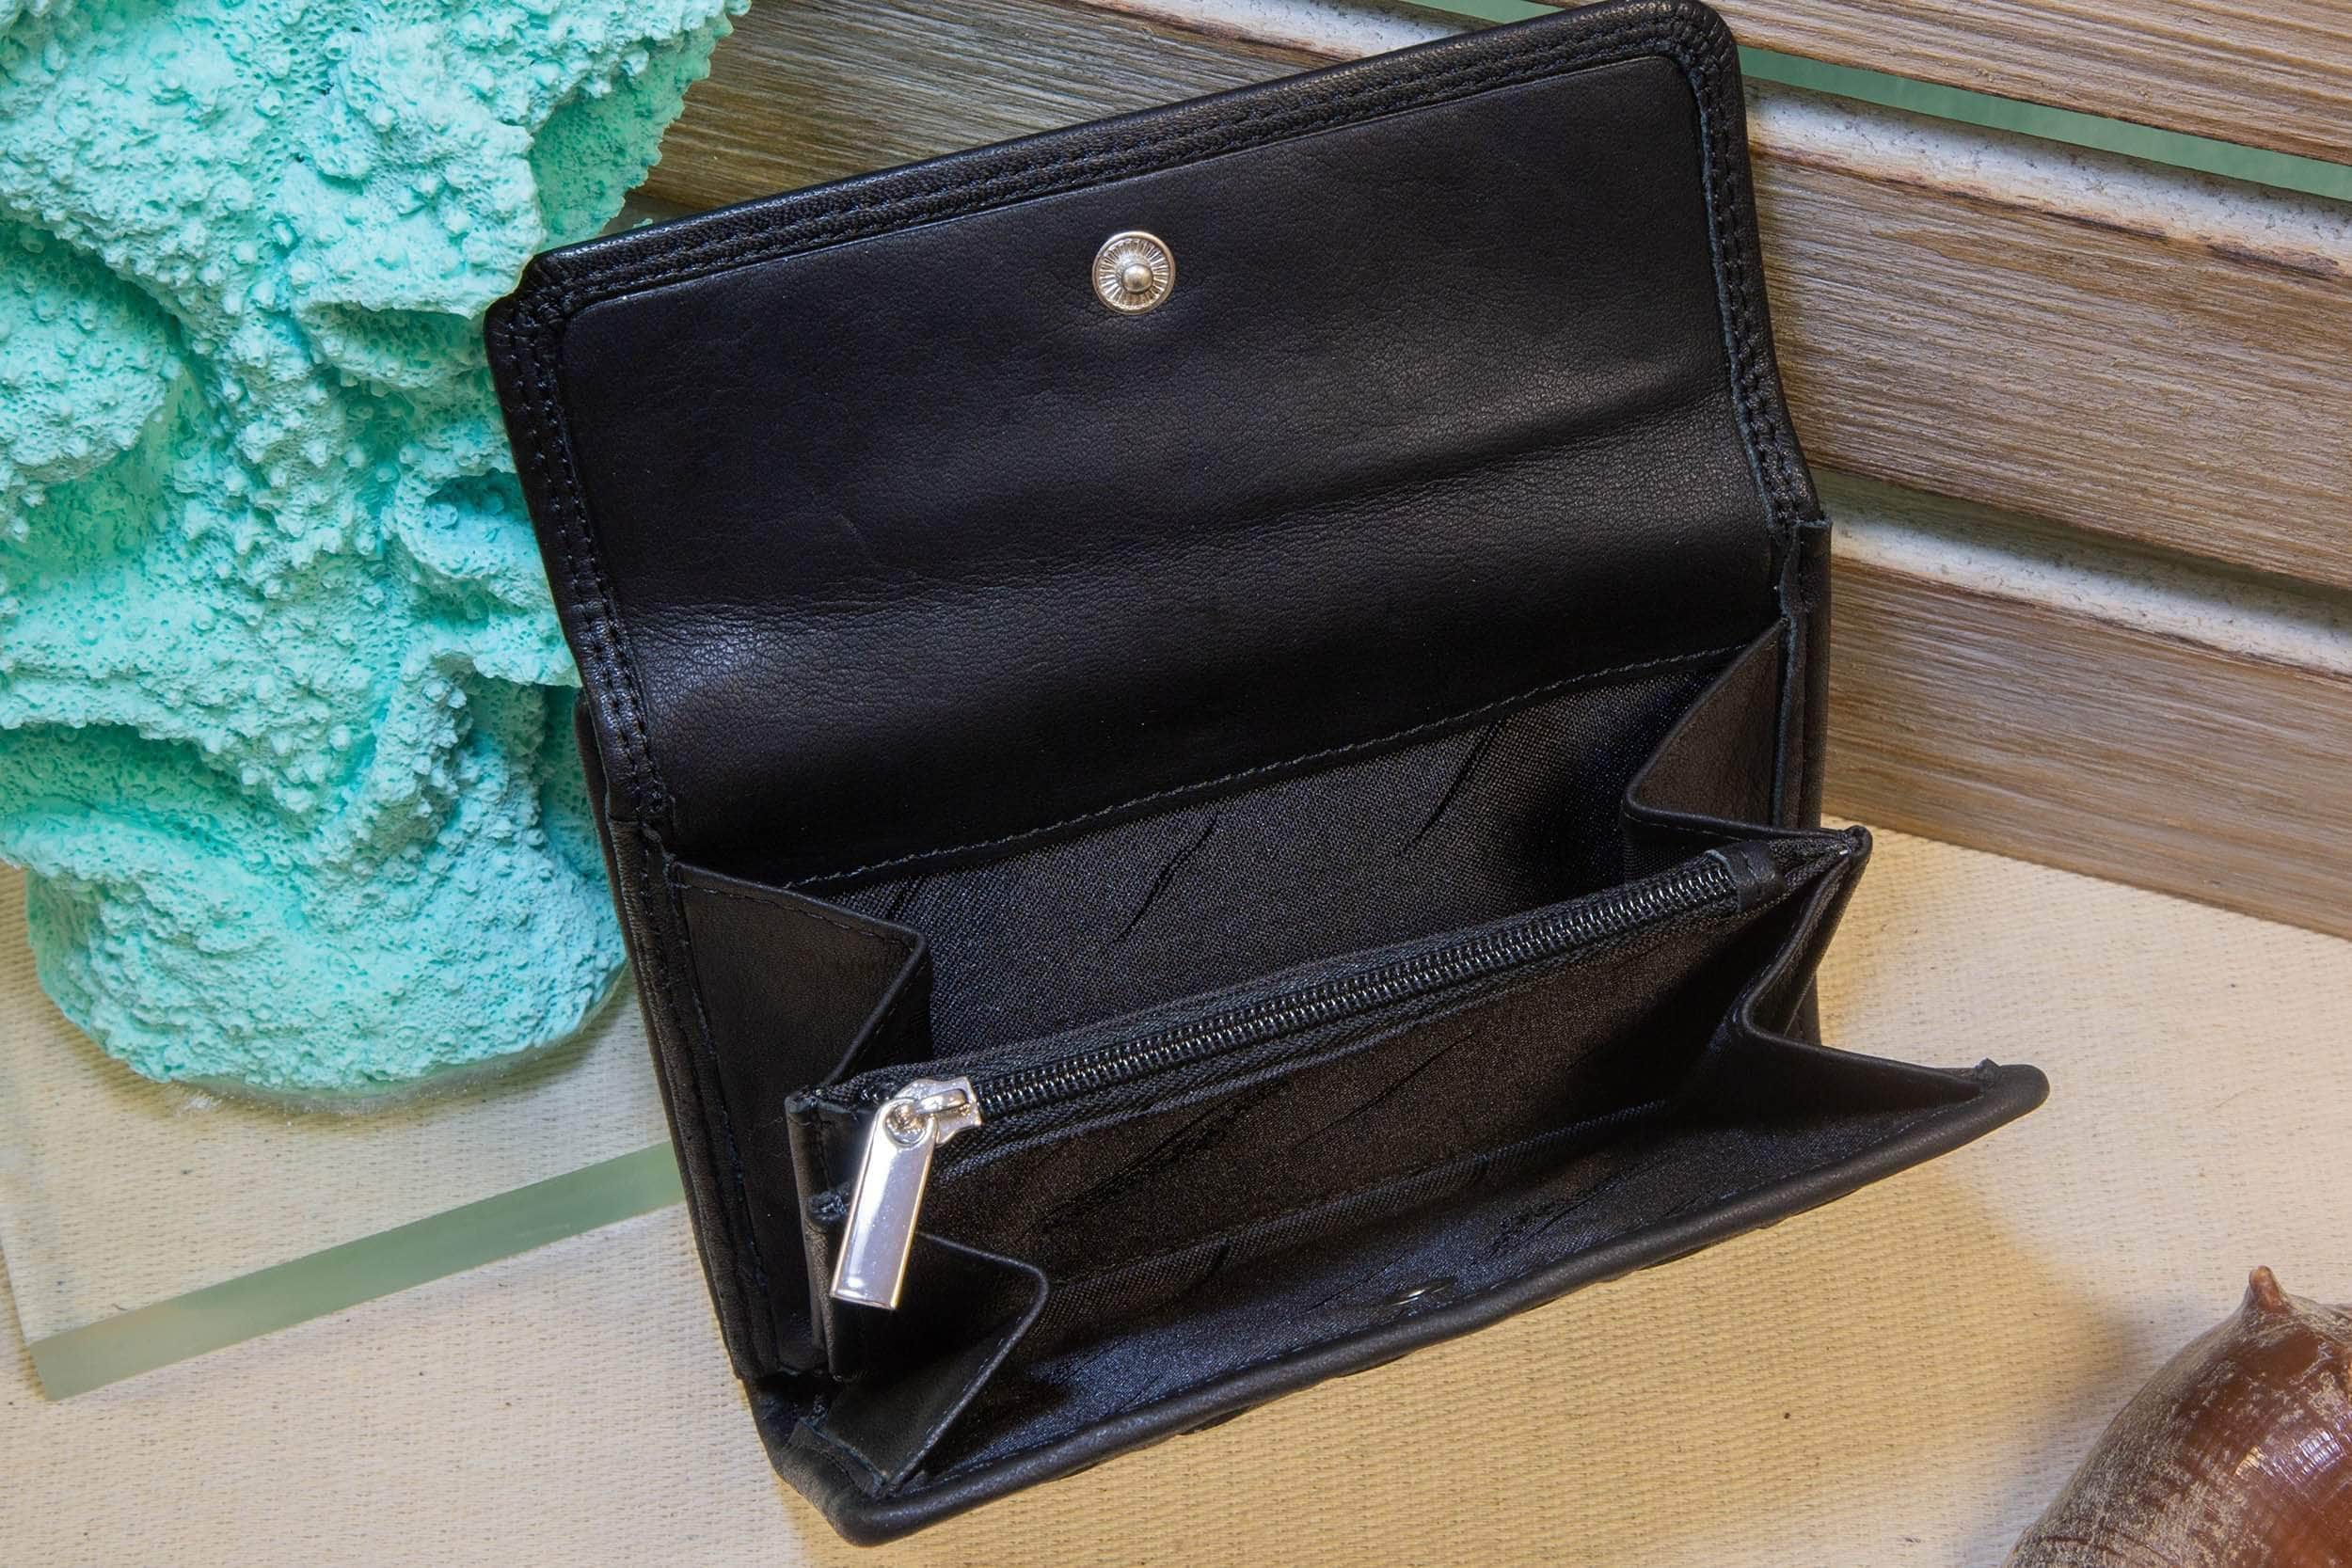 Designer Leather Mini Wallet Bag With Card Holder And Soft Quilted Design  Short Style Pouch In Black Color From Sophy_htt, $24.1 | DHgate.Com